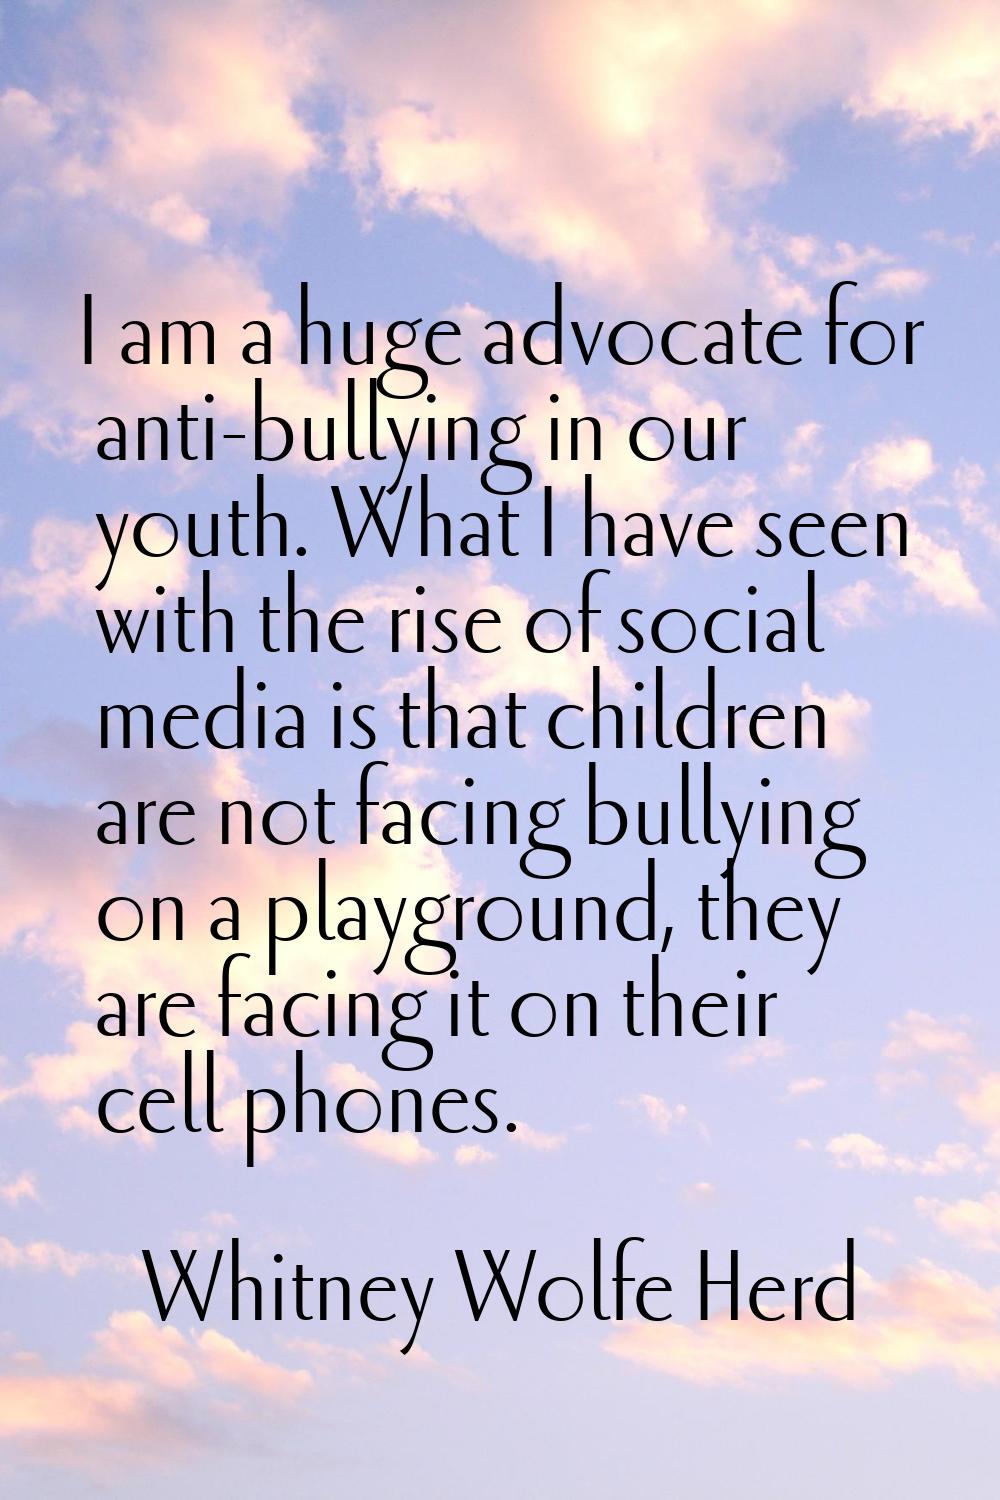 I am a huge advocate for anti-bullying in our youth. What I have seen with the rise of social media